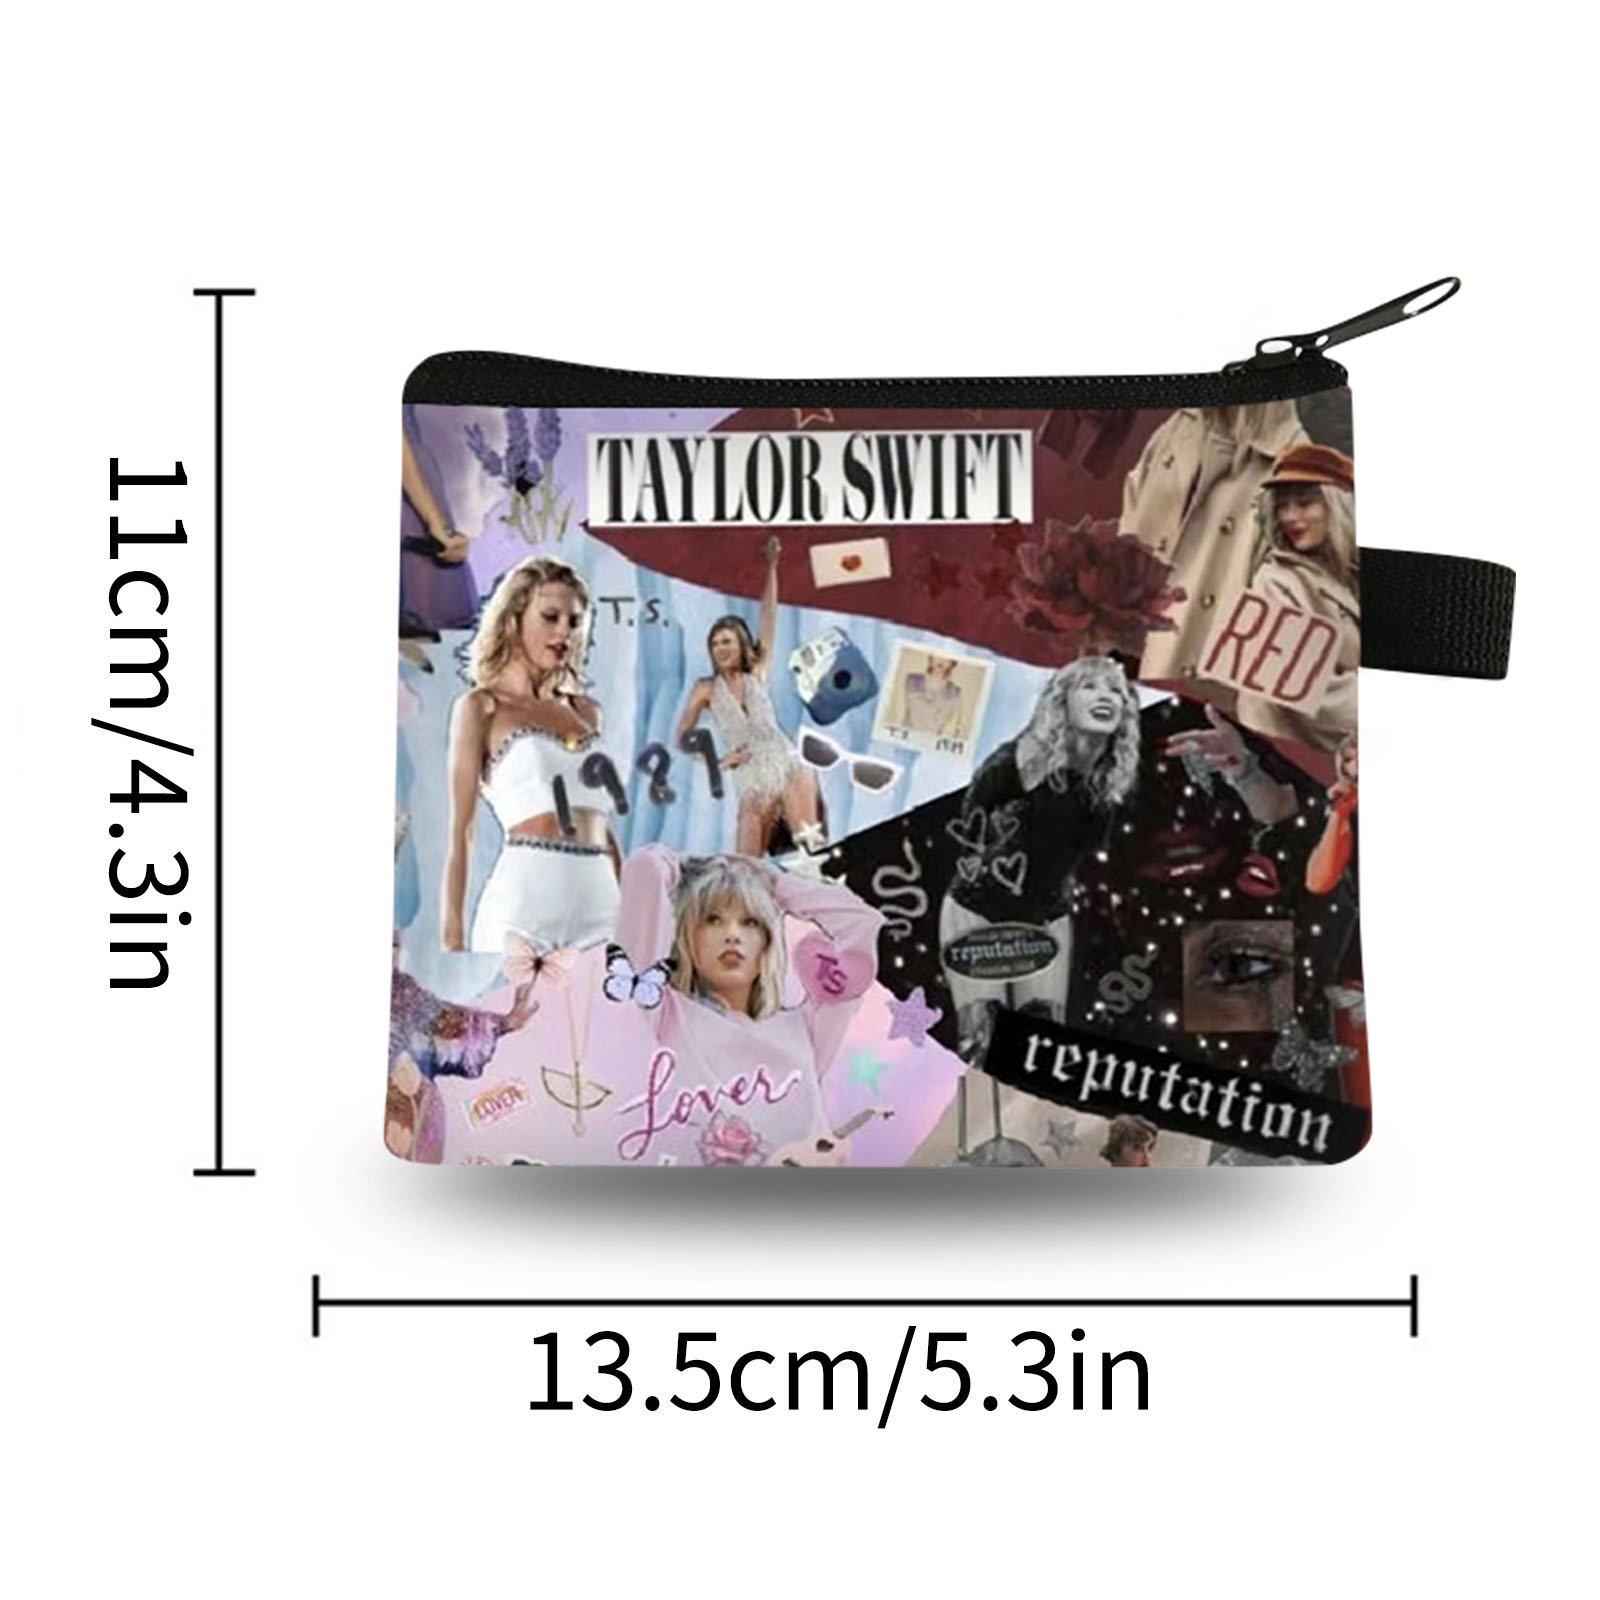 UP to 40% Off TS Swiftie Gifts,Taylor Swift Makeup Bag, Taylor Swift Gifts,  Makeup Bag Styles Portable Travel Cosmetic Bag for Women Flower 